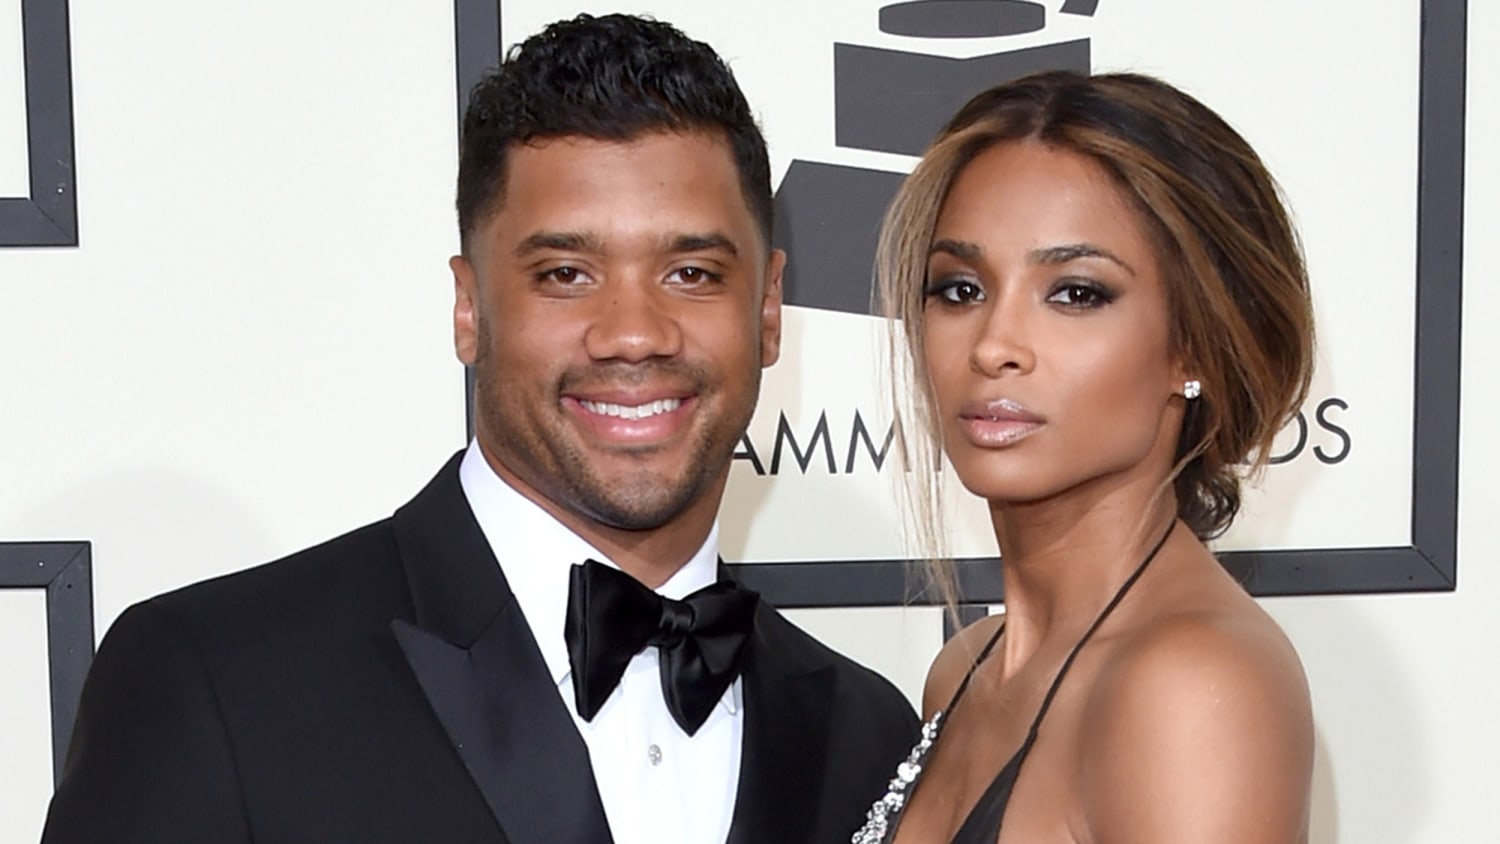 Ciara and Russell Wilson announce engagement in sweet video: 'She said yes!' - TODAY.com